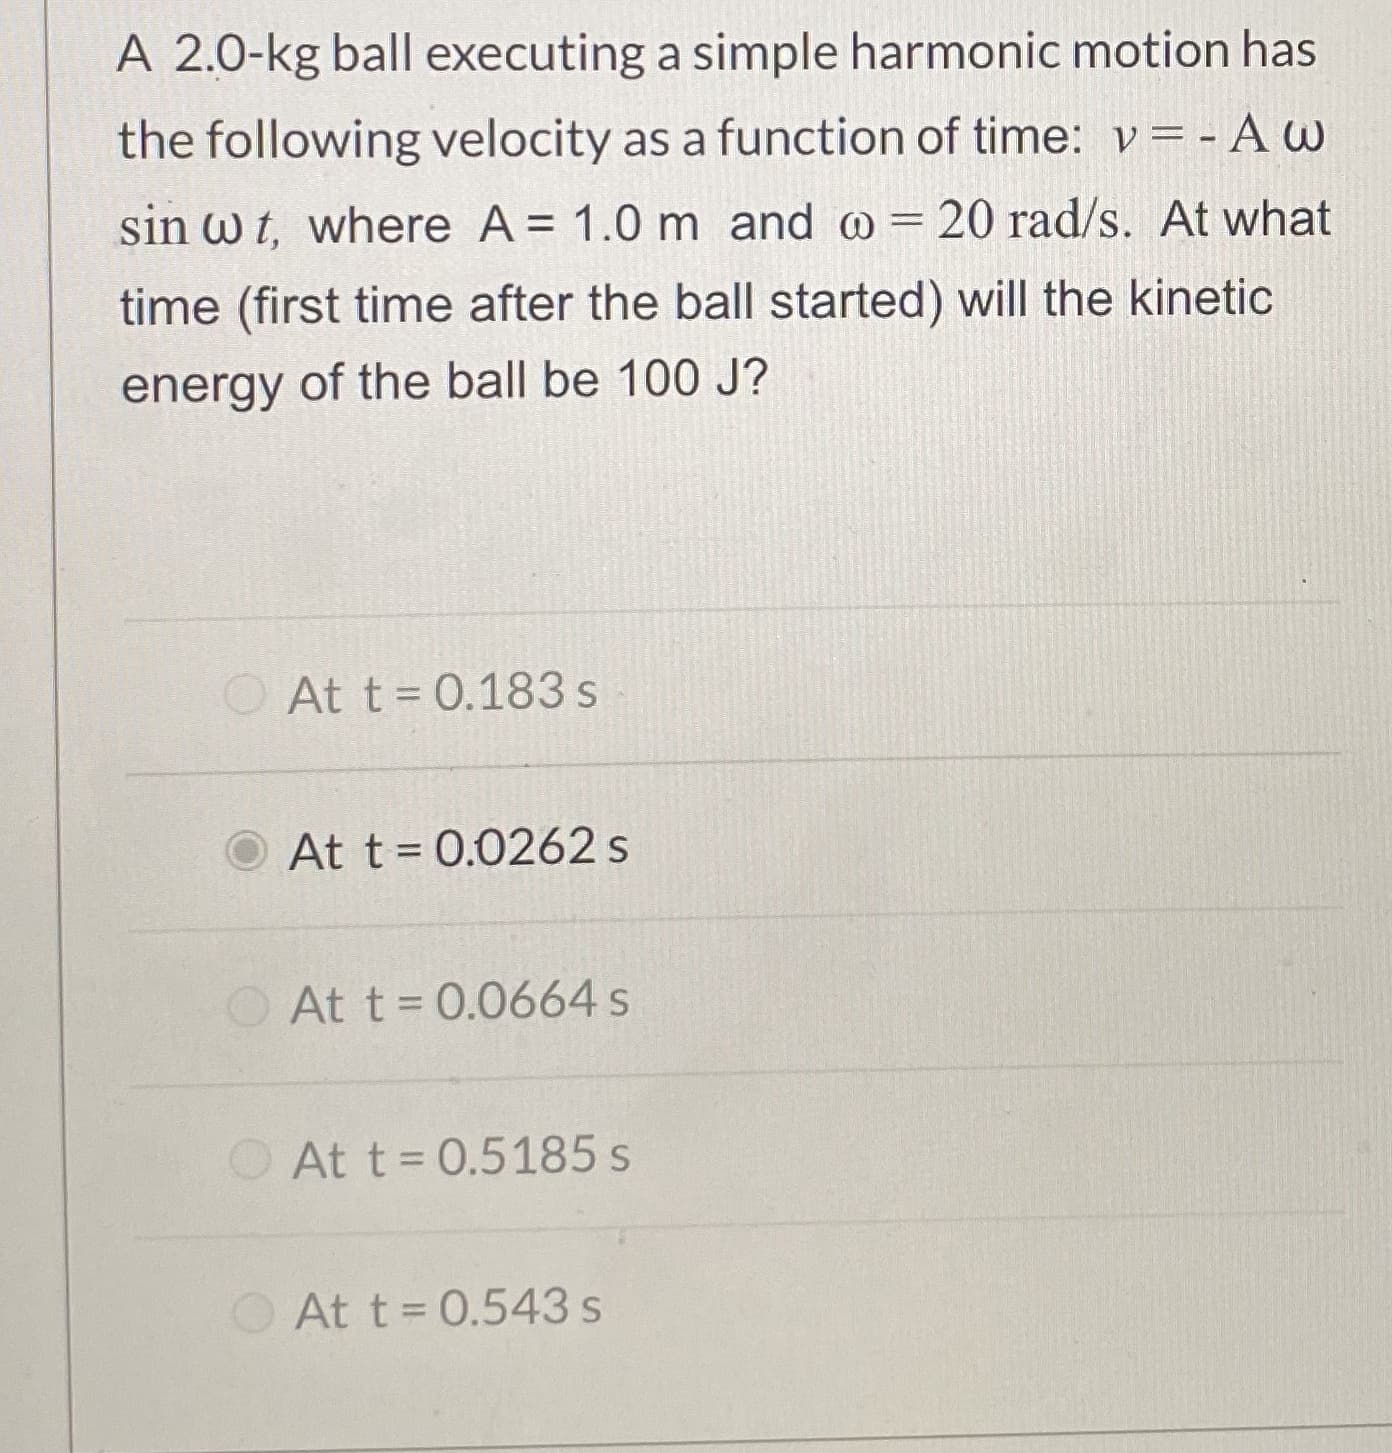 A 2.0-kg ball executing a simple harmonic motion has
the following velocity as a function of time: v=-A w
sin w t, where A= 1.0 m and @ = 20 rad/s. At what
time (first time after the ball started) will the kinetic
energy of the ball be 100 J?
